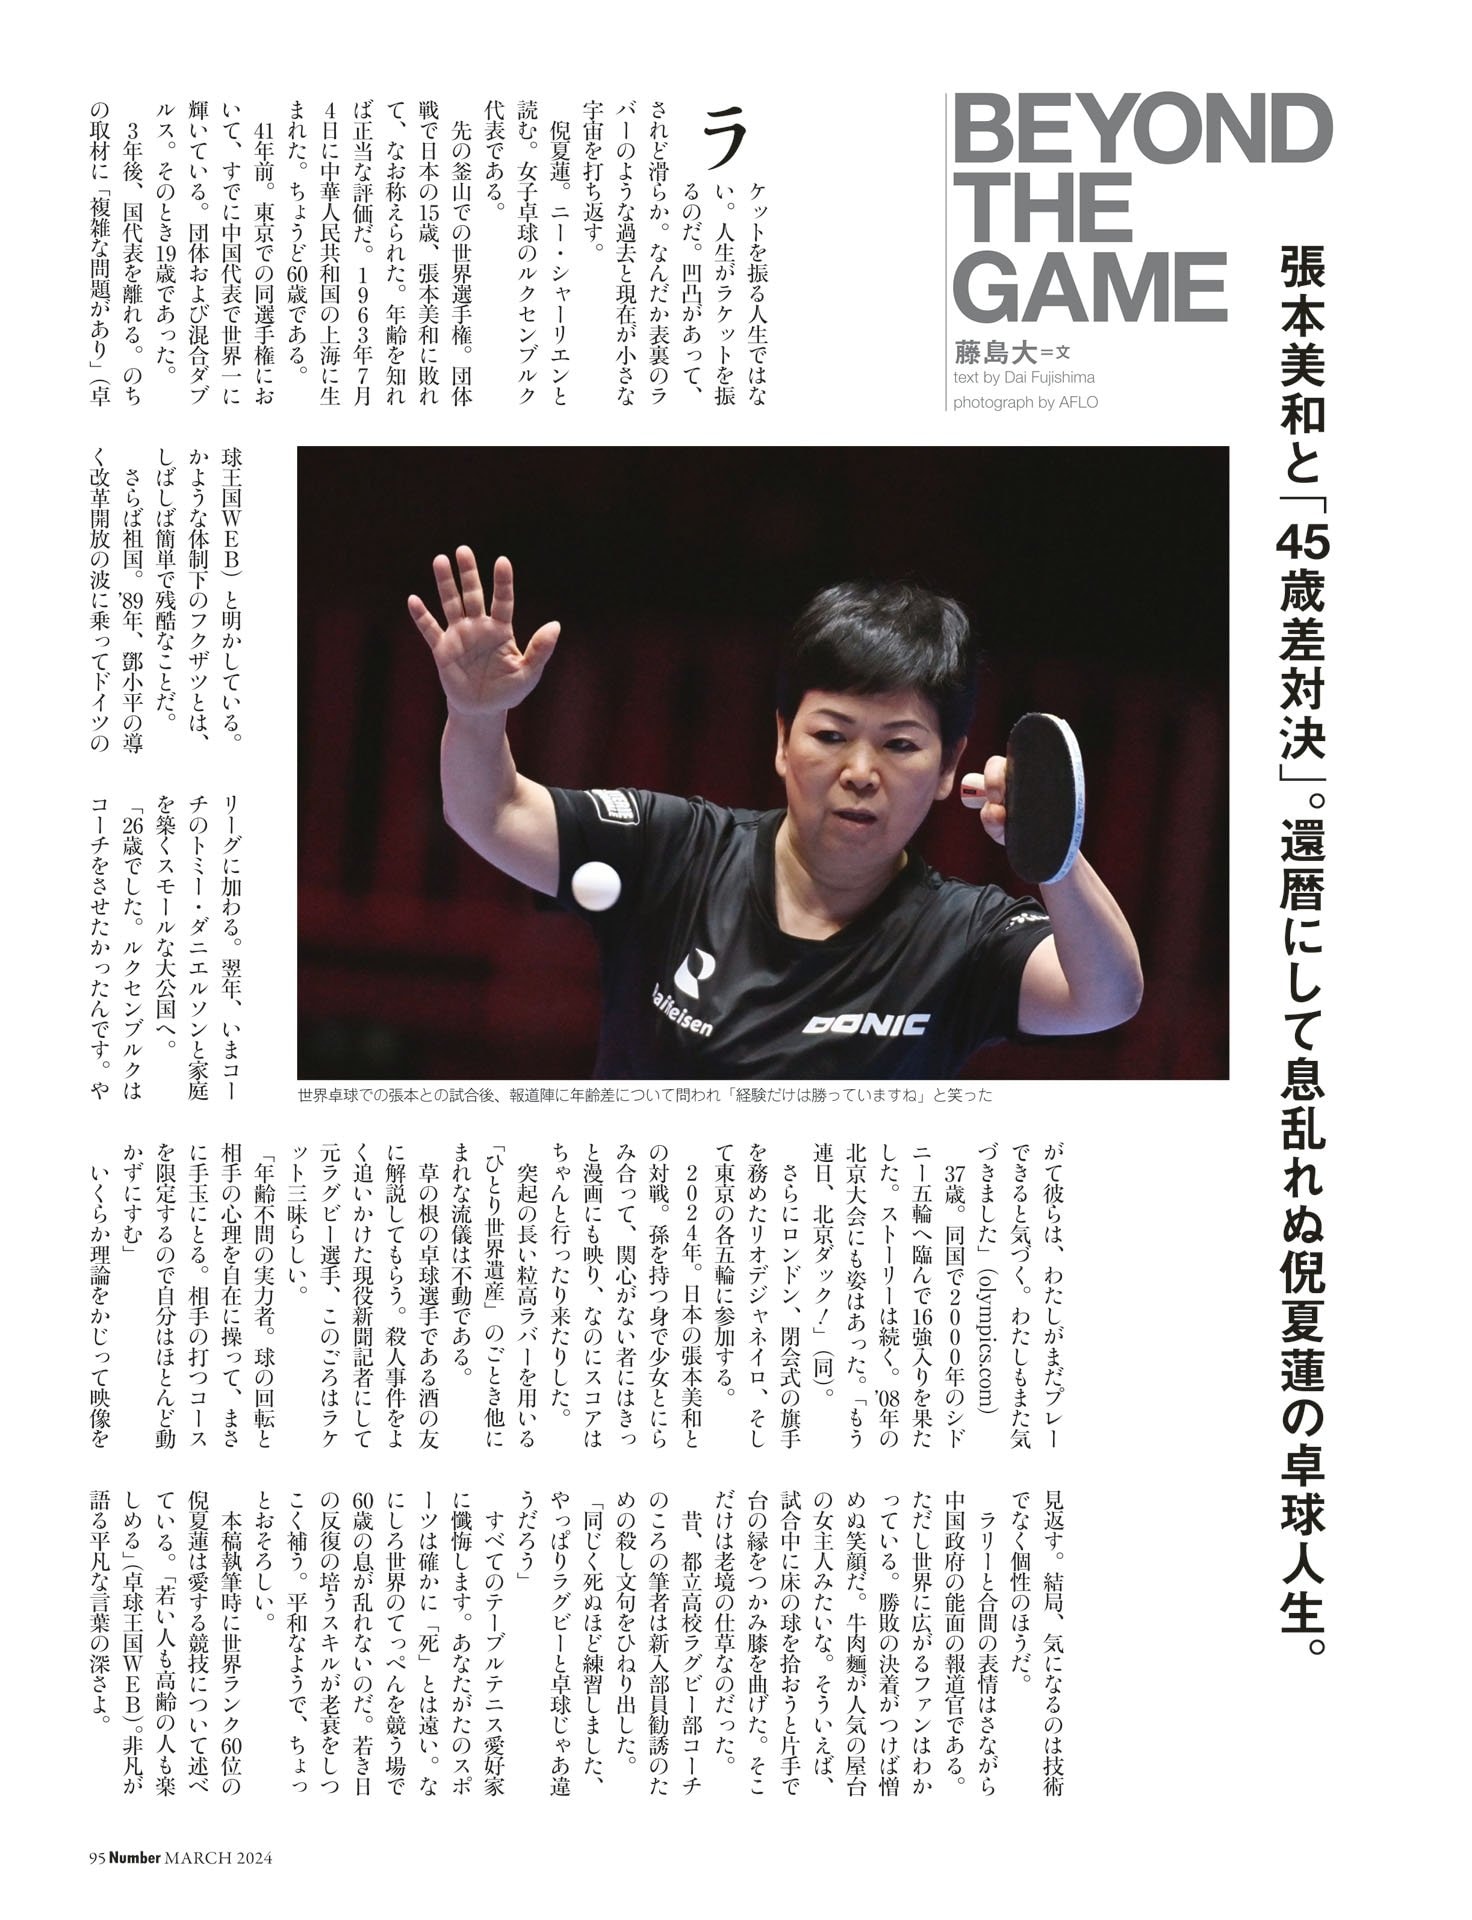 BEYOND THE GAME　藤島大「還暦にして息乱れず」